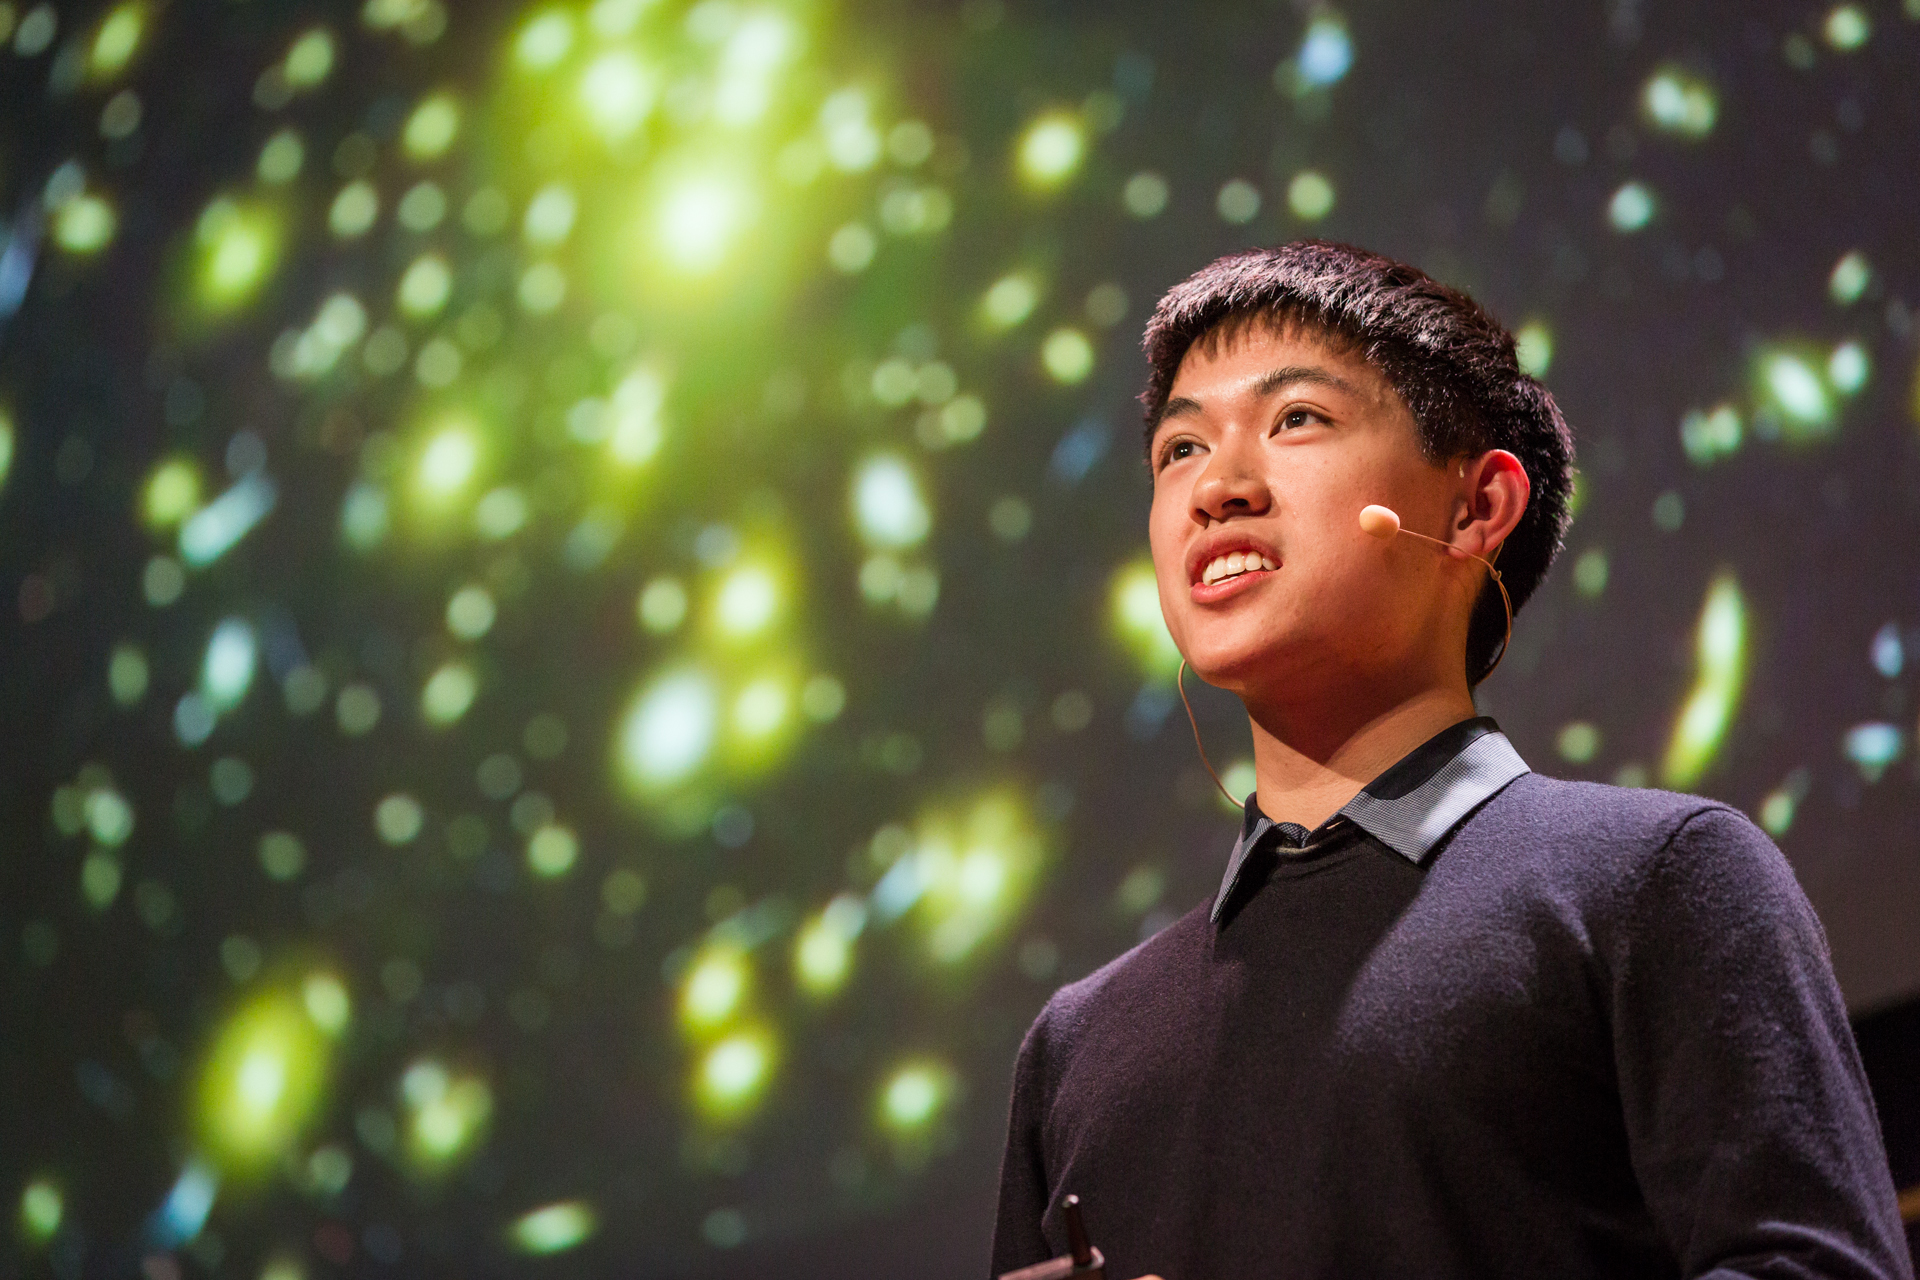 Henry Lin, who won this year’s Intel Science Fair for his models of galaxy clusters, delivers the message: "Science is a rough draft. There is so much that baffles us and challenges our understanding." Photo: Ryan Lash